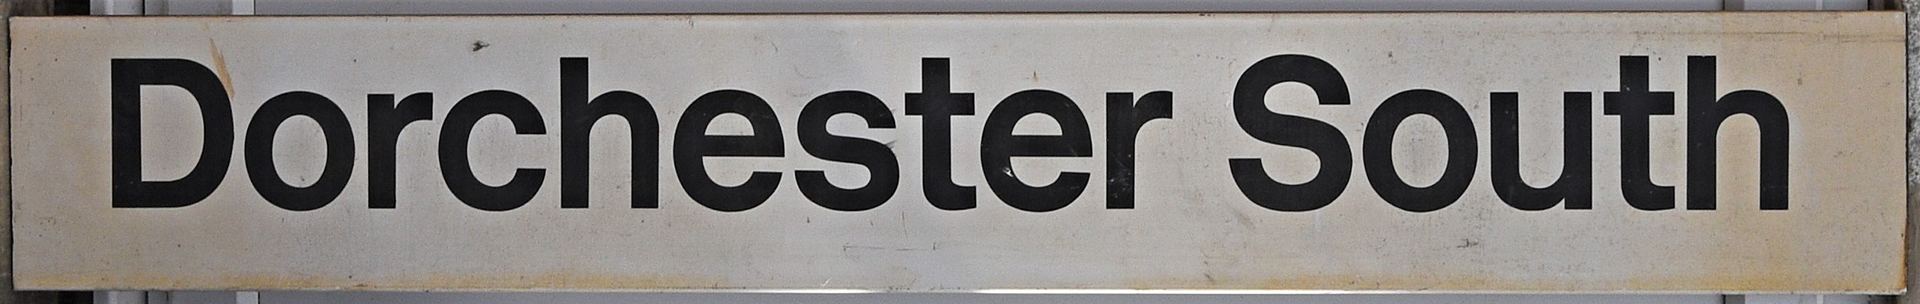 British Rail Station Sign. DORCHESTER SOUTH. Measures 82in x 12in.